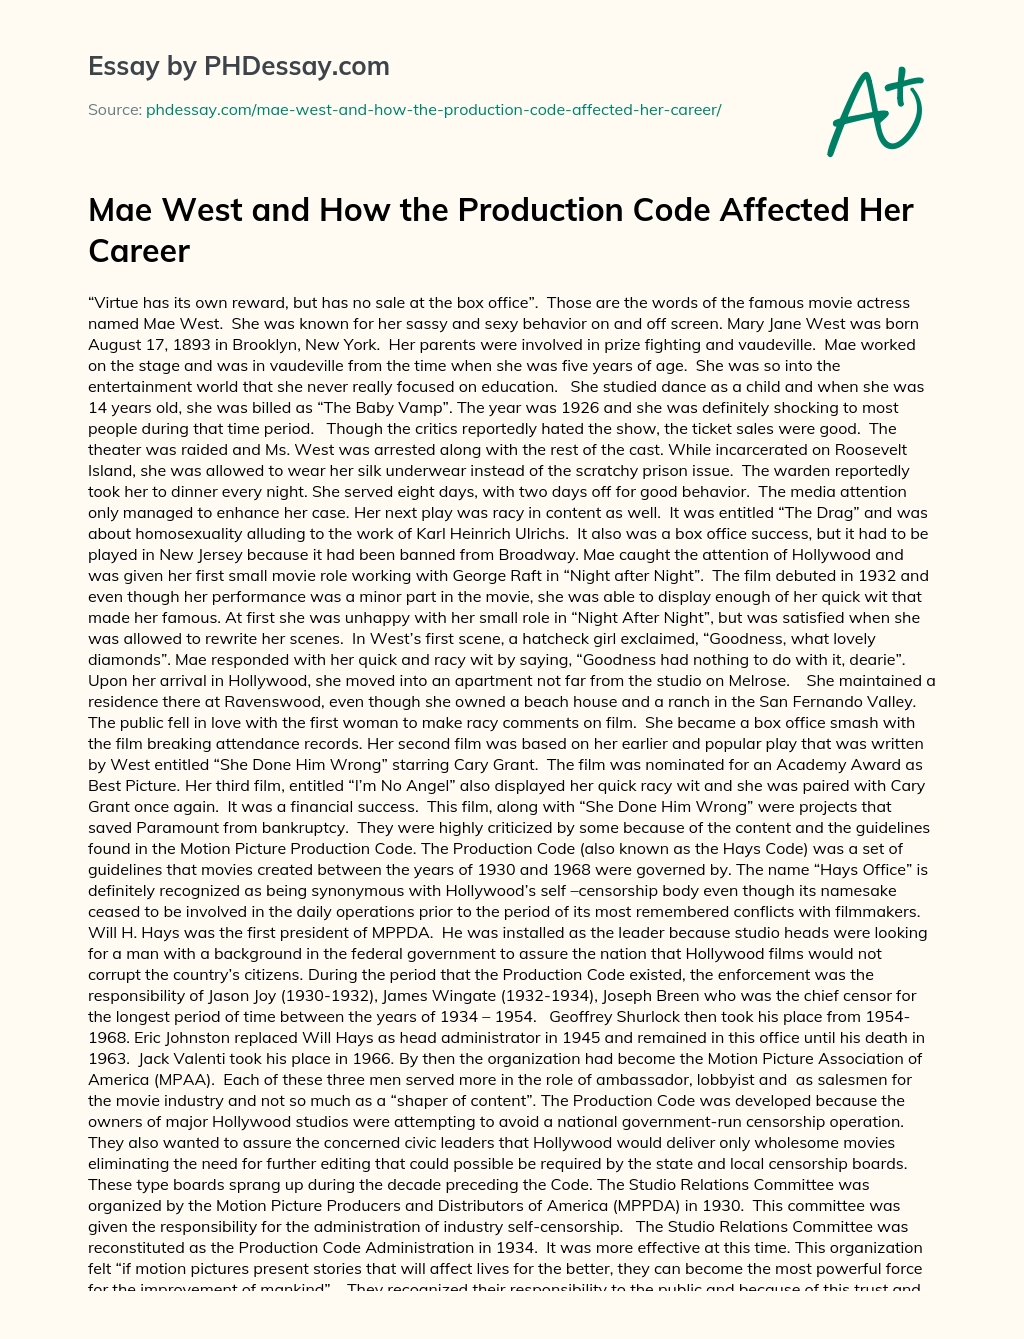 Mae West and How the Production Code Affected Her Career essay